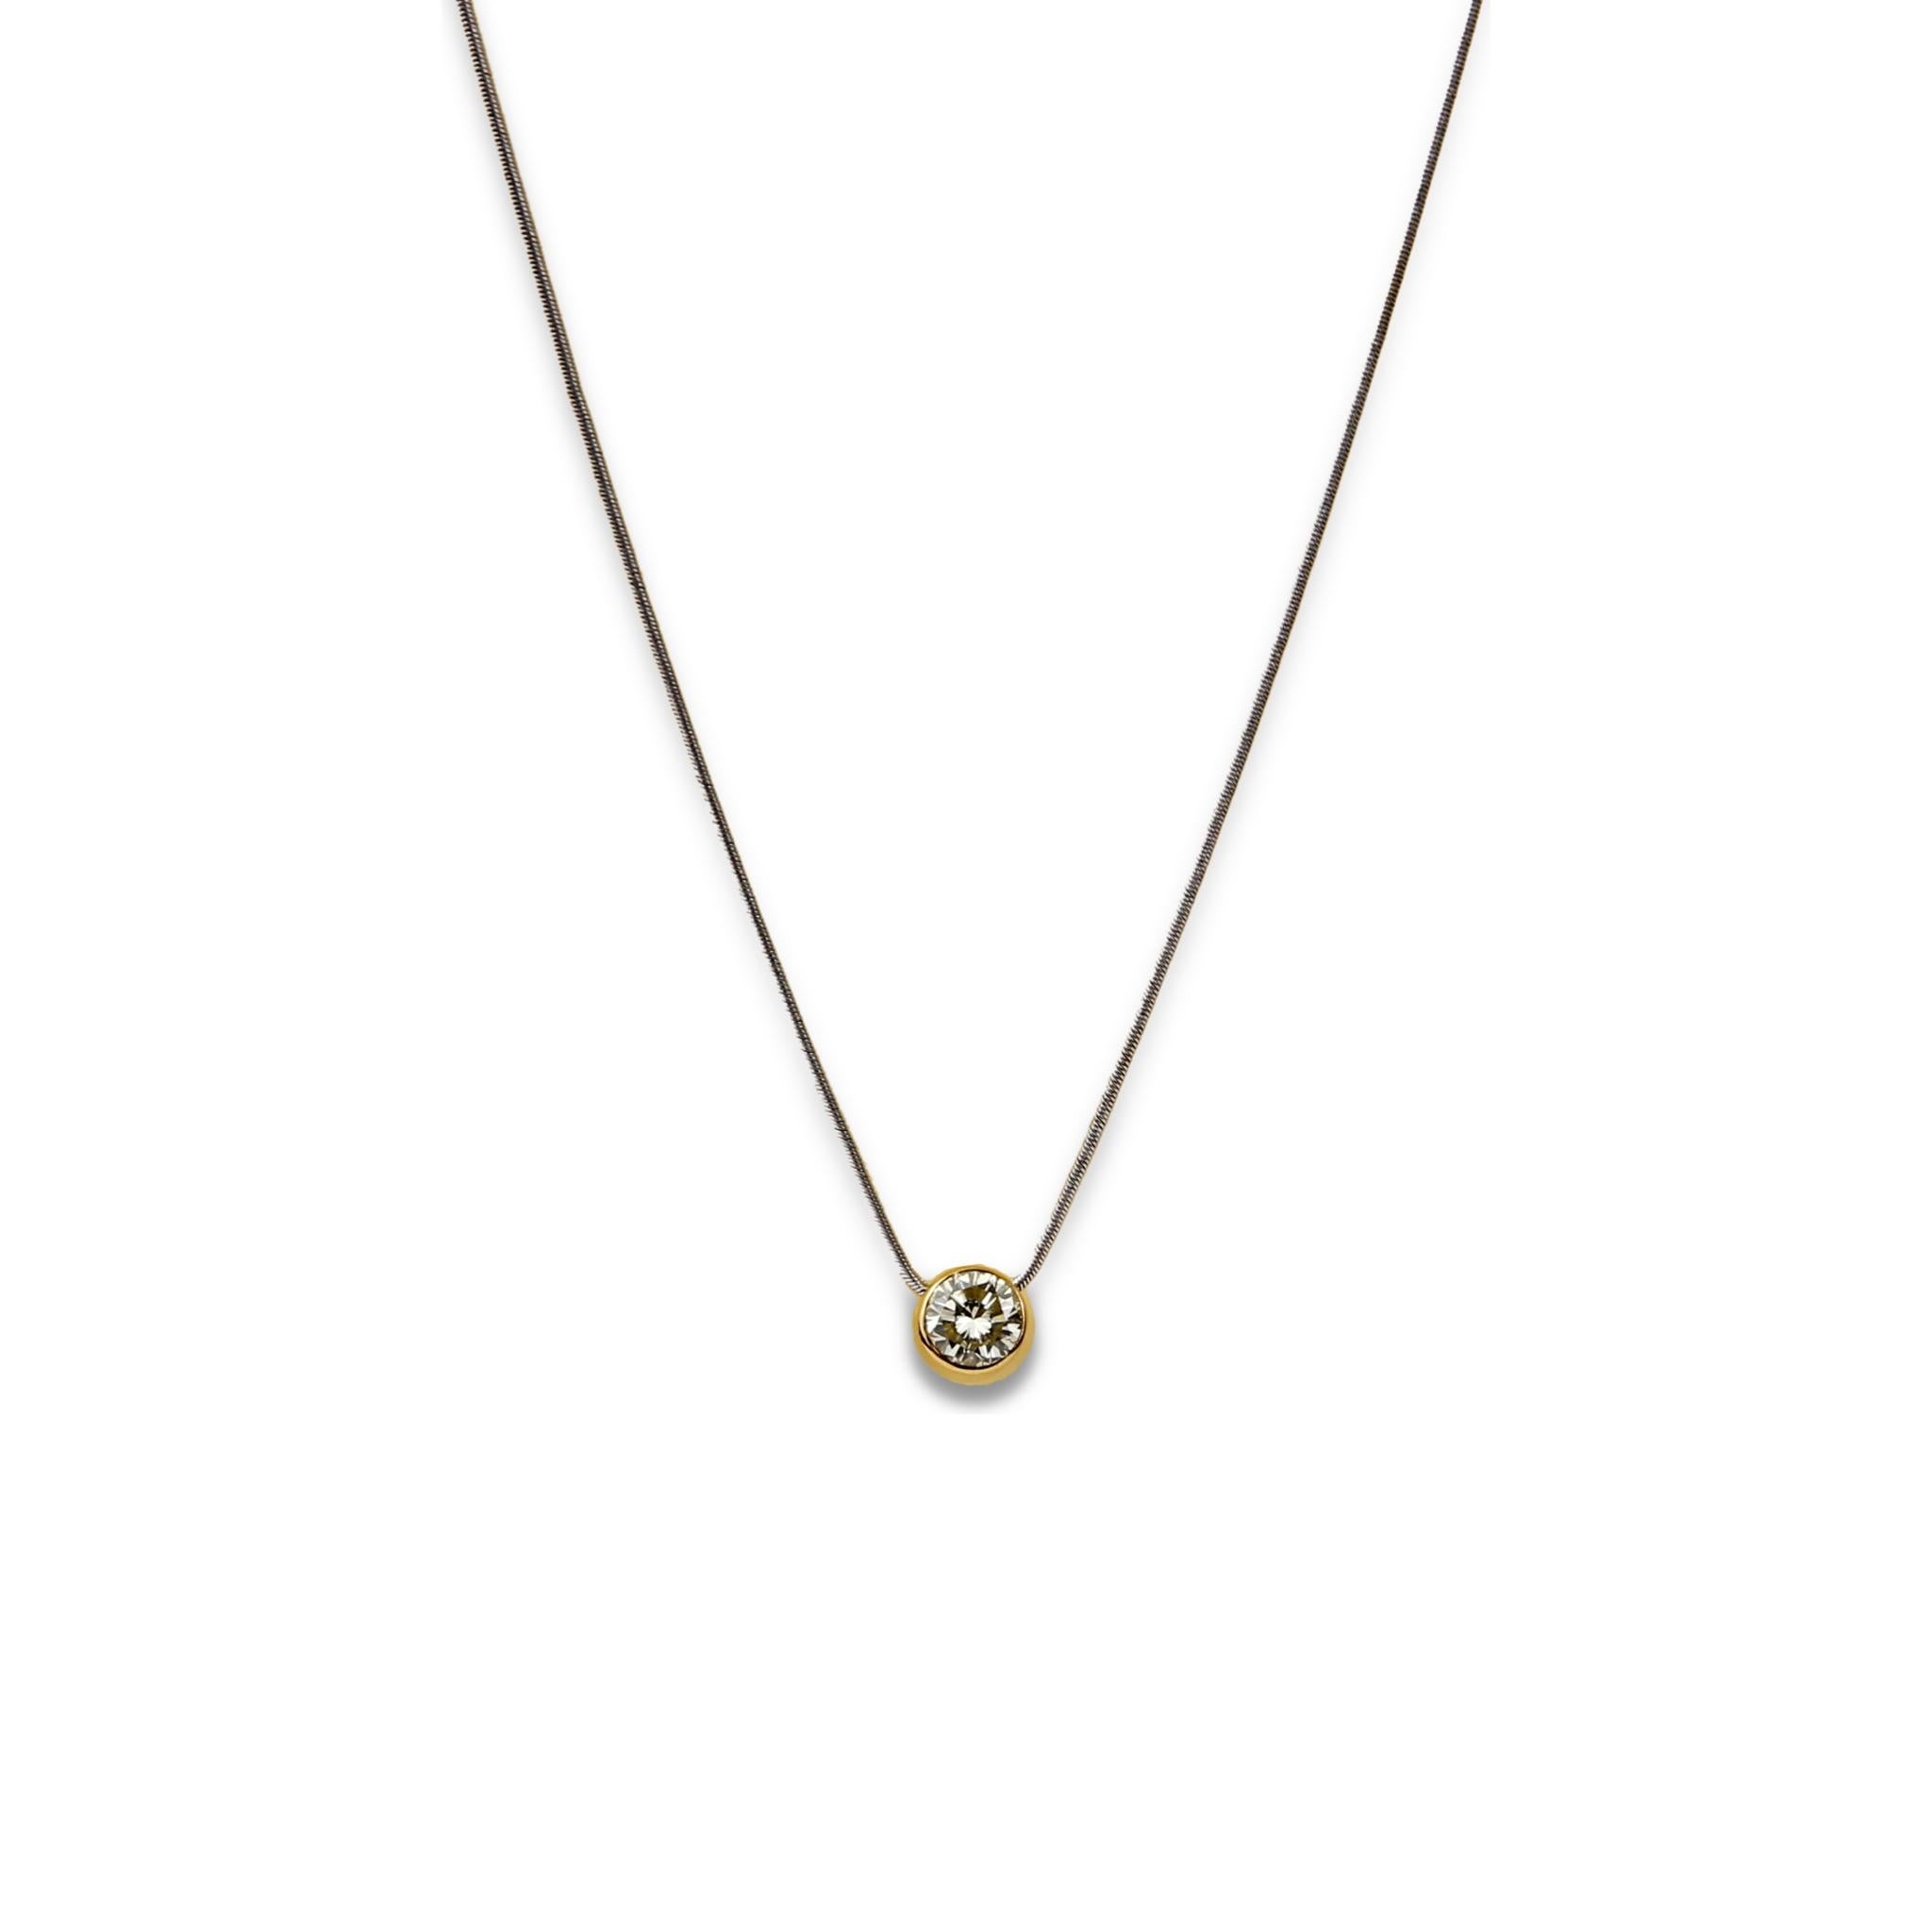 18K Yellow Gold and 14K White Gold Pendant Necklace
Round Yellow Diamond: 1.02ct
Reference number: ECJ01424